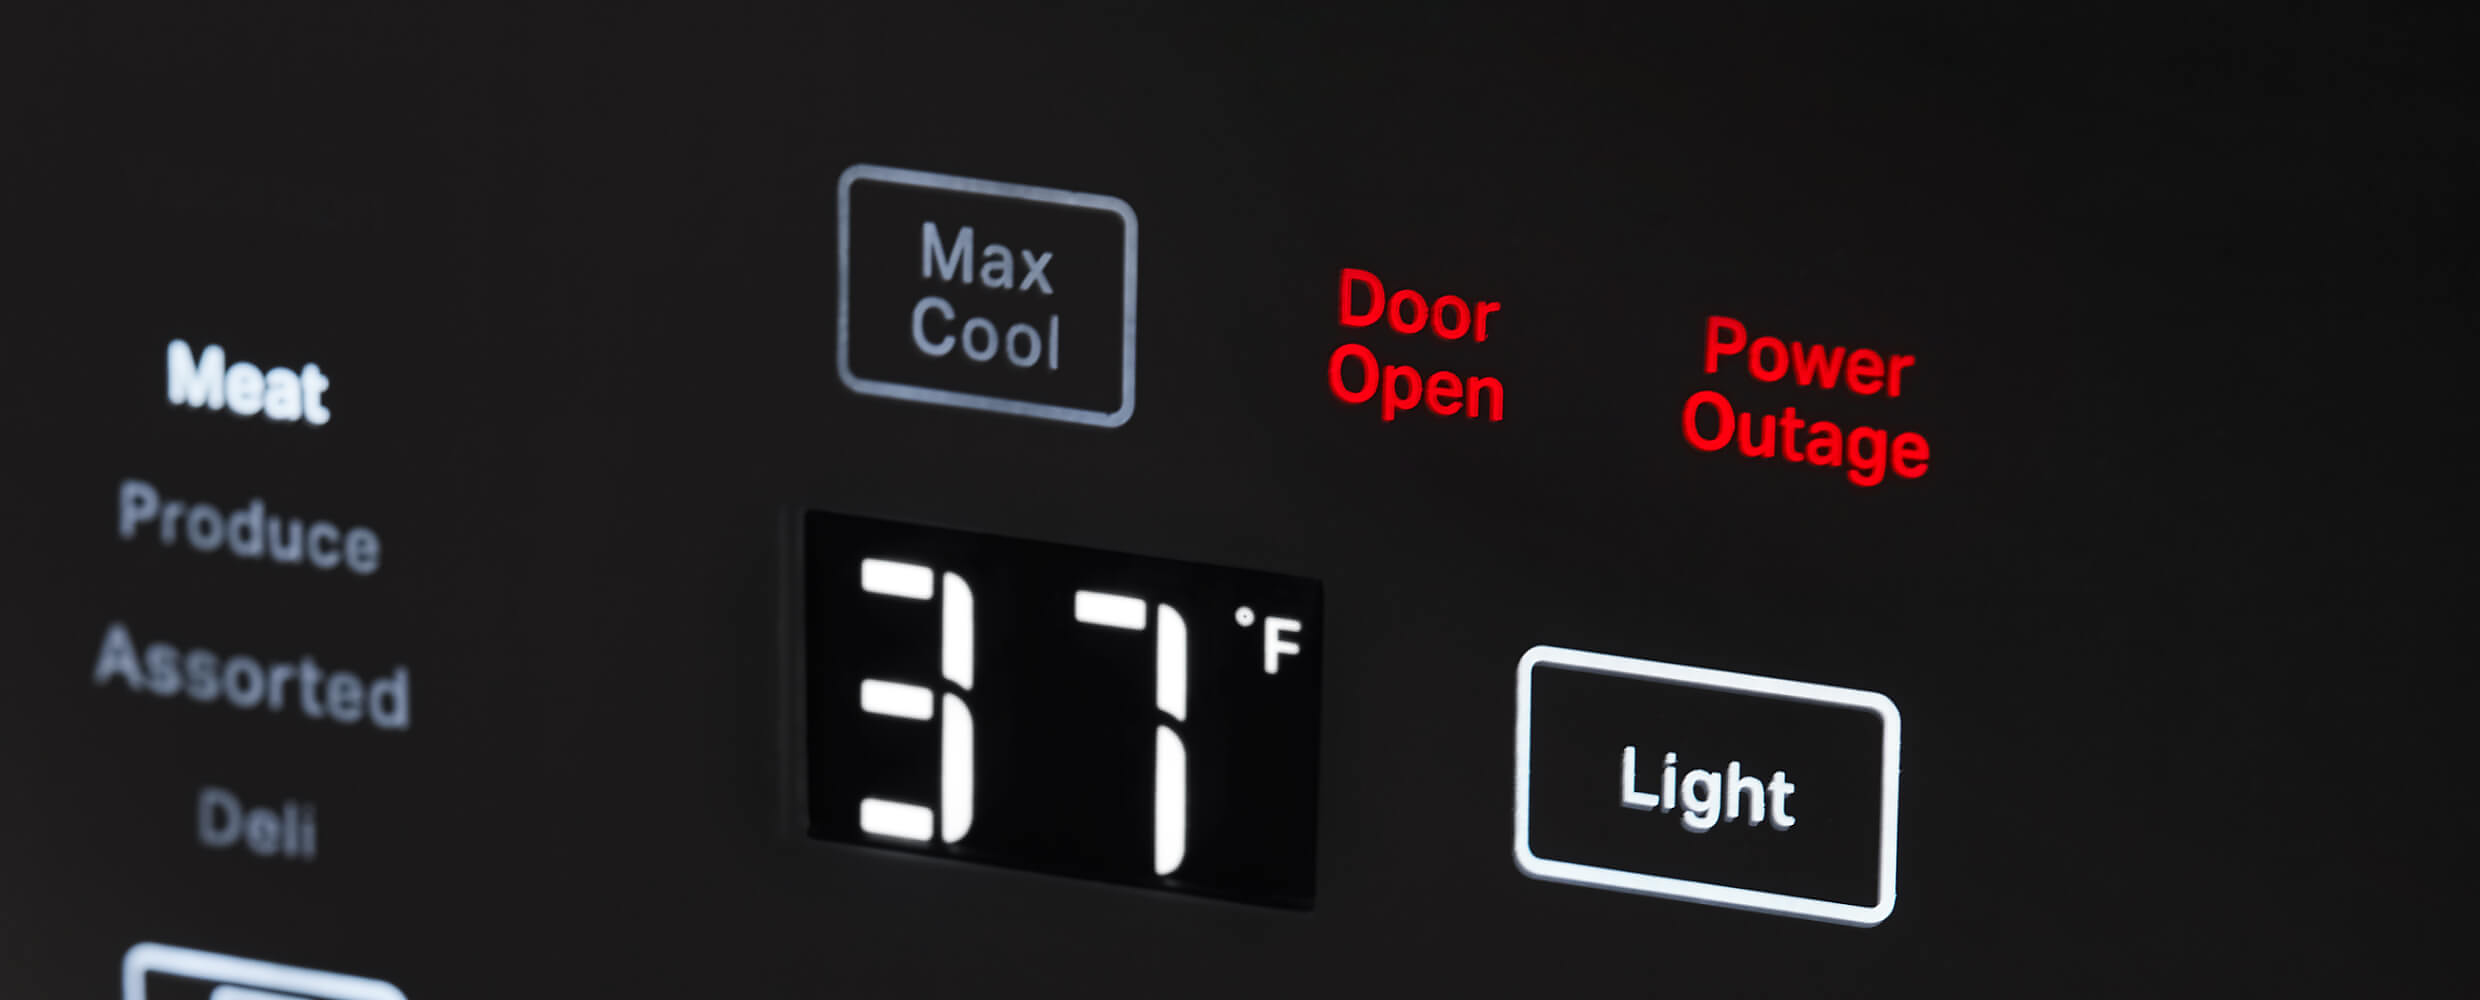 Door Open and Power Outage buttons on External Touchscreen Controls on the  48" KitchenAid® Built-In Side-by-Side Refrigerator